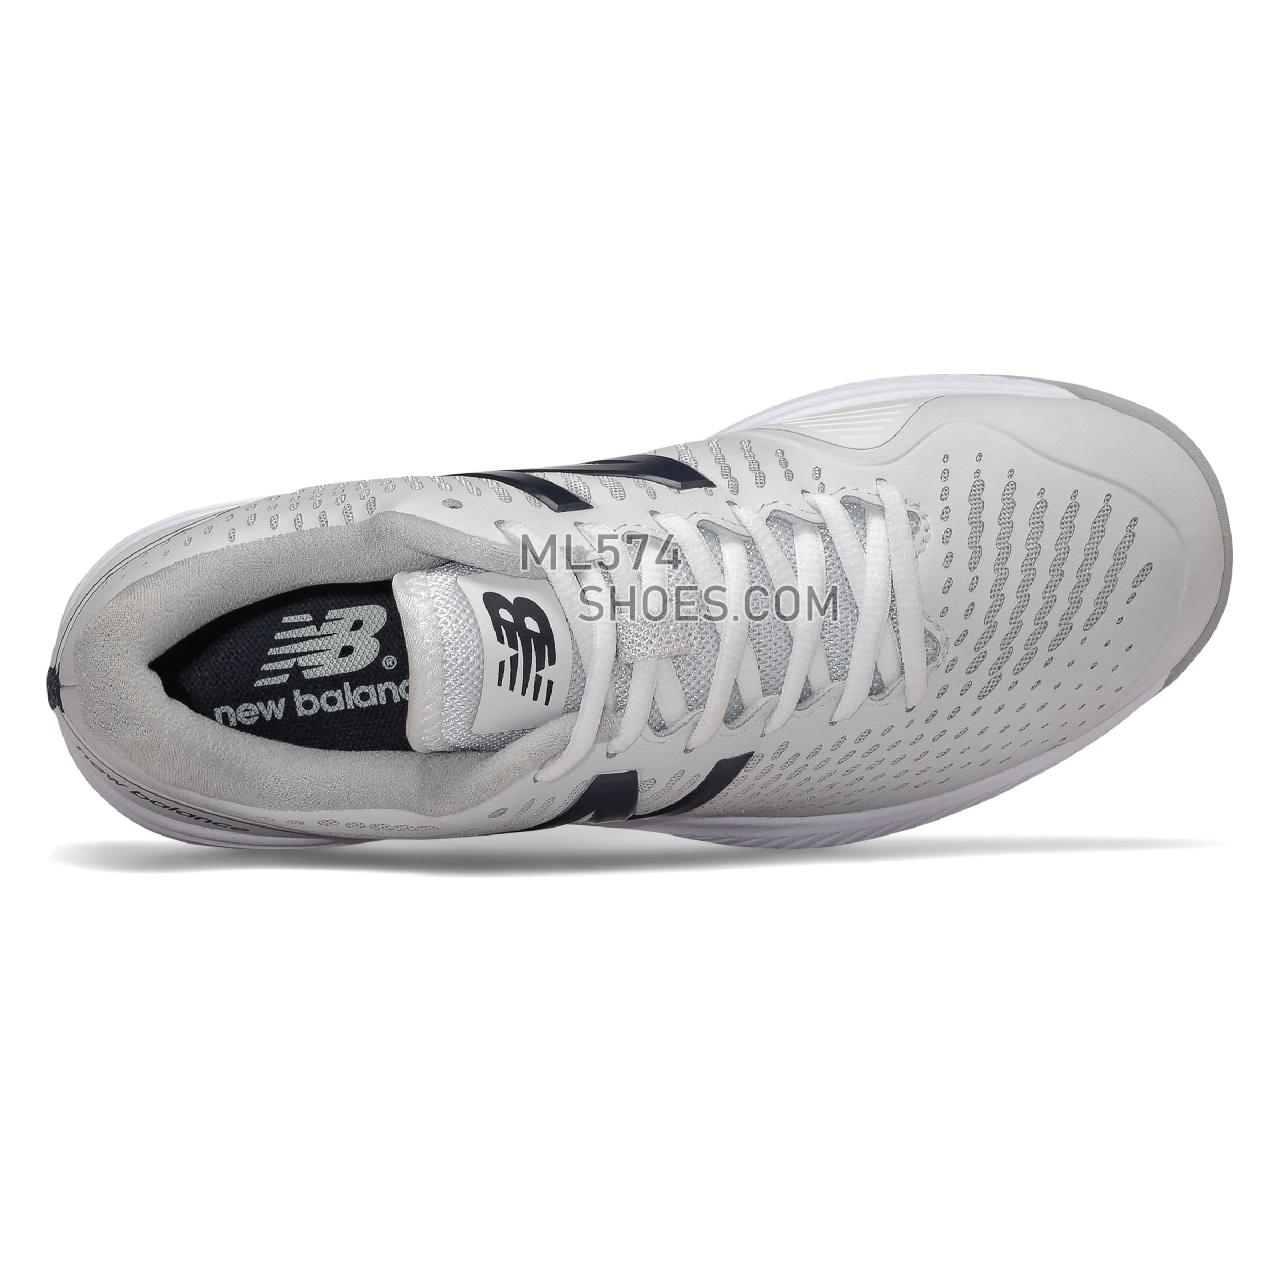 New Balance 796v2 - Women's Tennis - White with Navy - WCH796N2